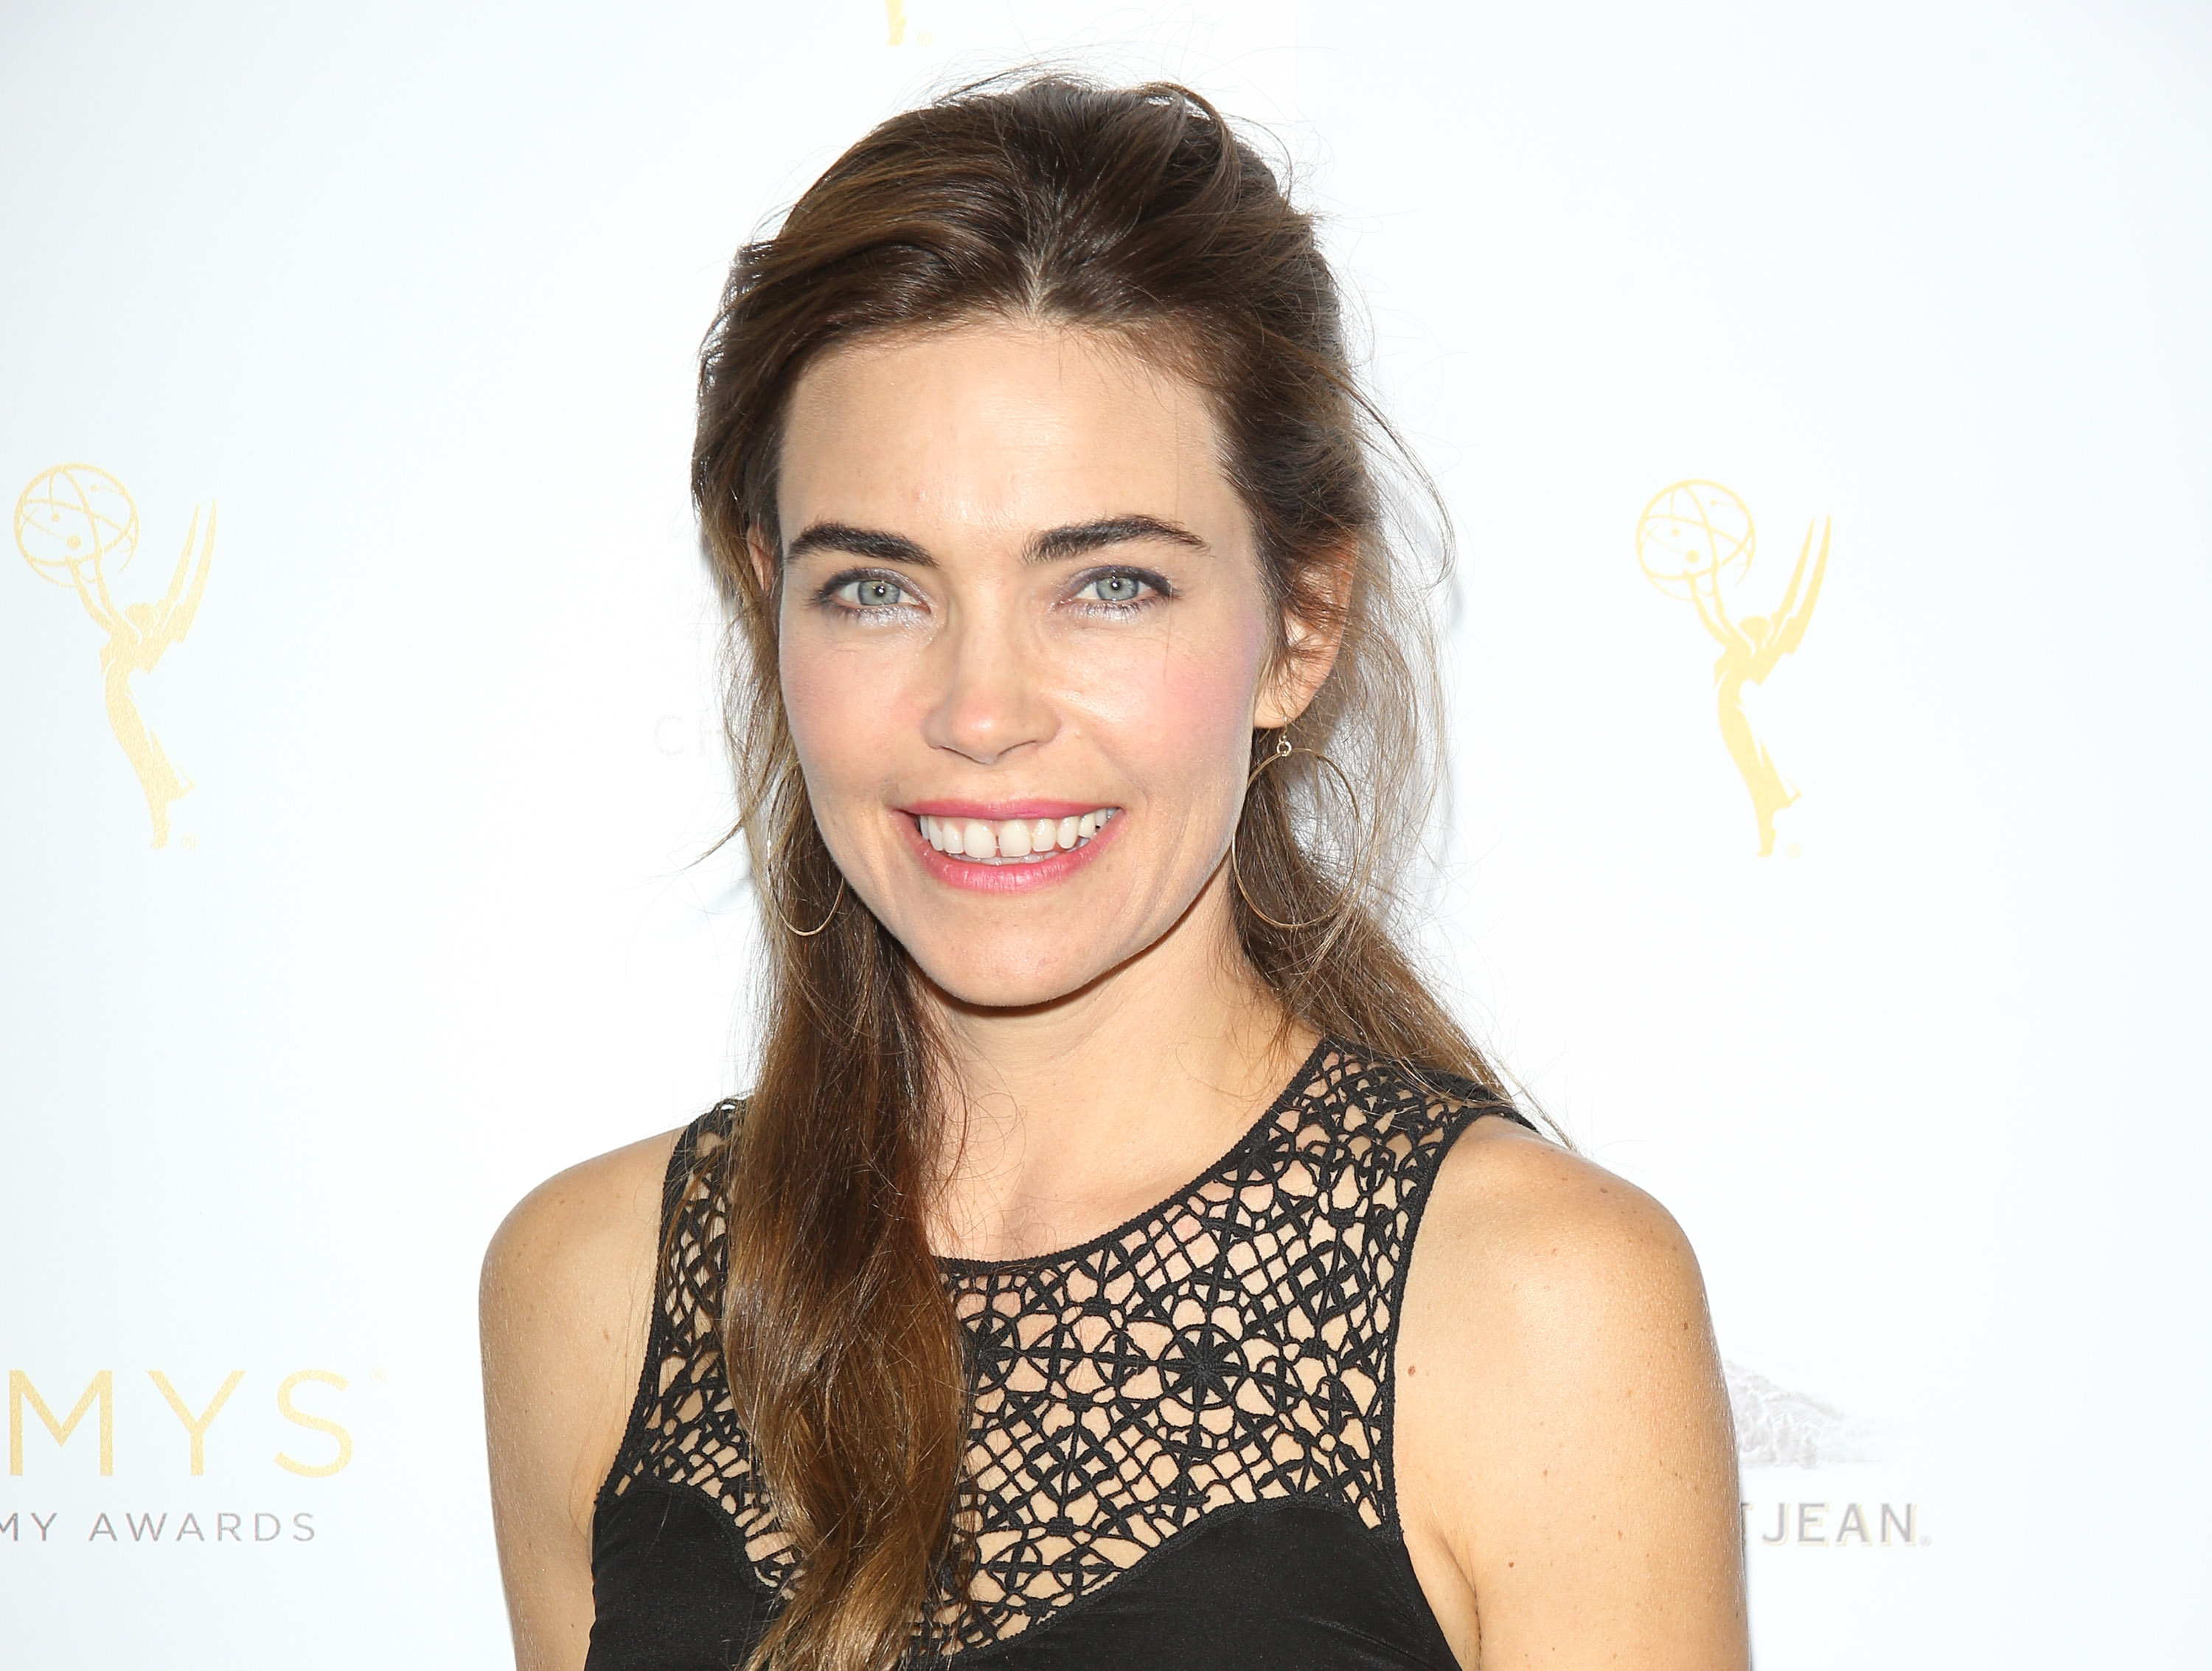 'The Young and the Restless' actor Amelia Heinle wearing a black dress and posing on the red carpet.